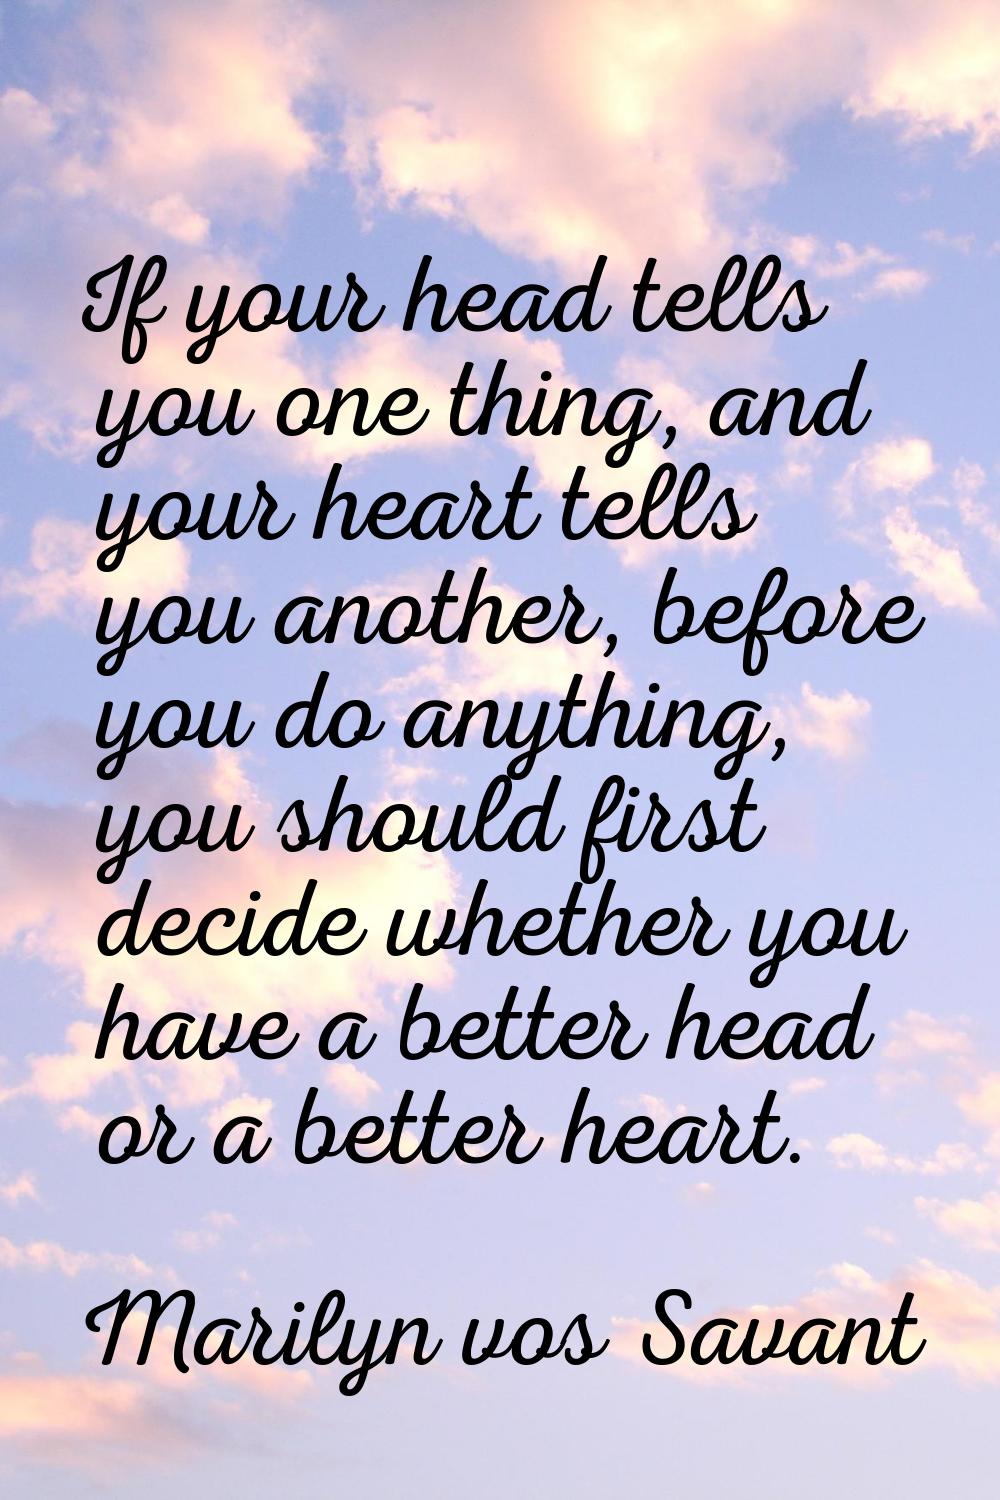 If your head tells you one thing, and your heart tells you another, before you do anything, you sho